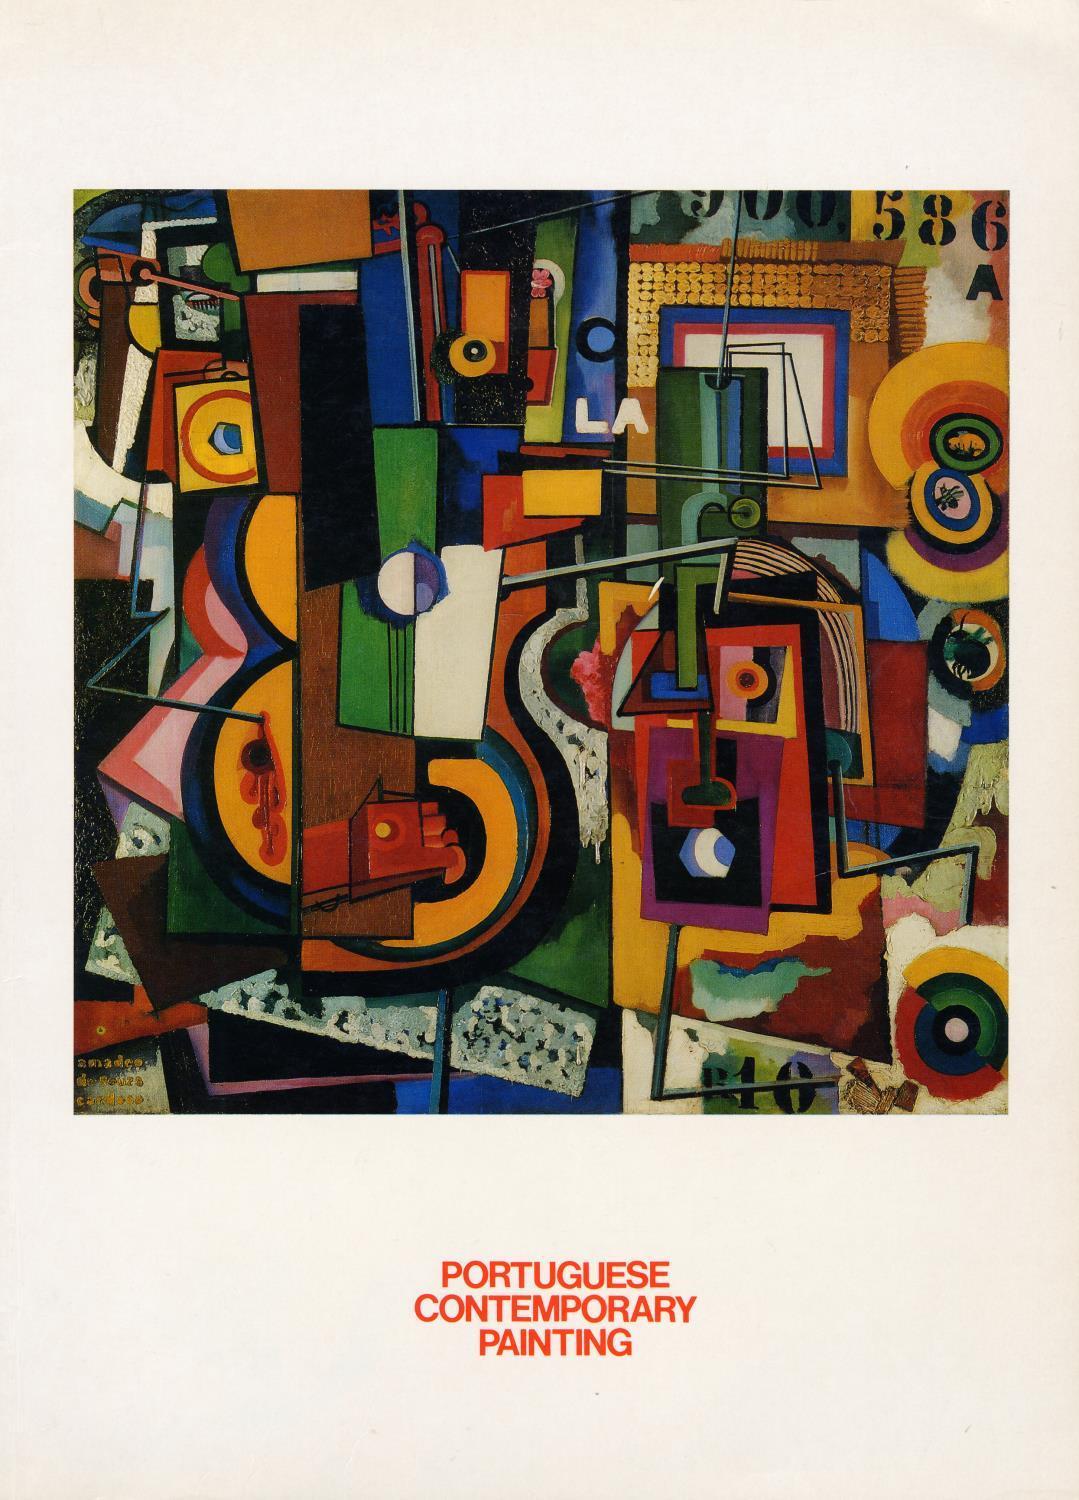 Portuguese Contemporary Painting. Collection of the Modern Art Center